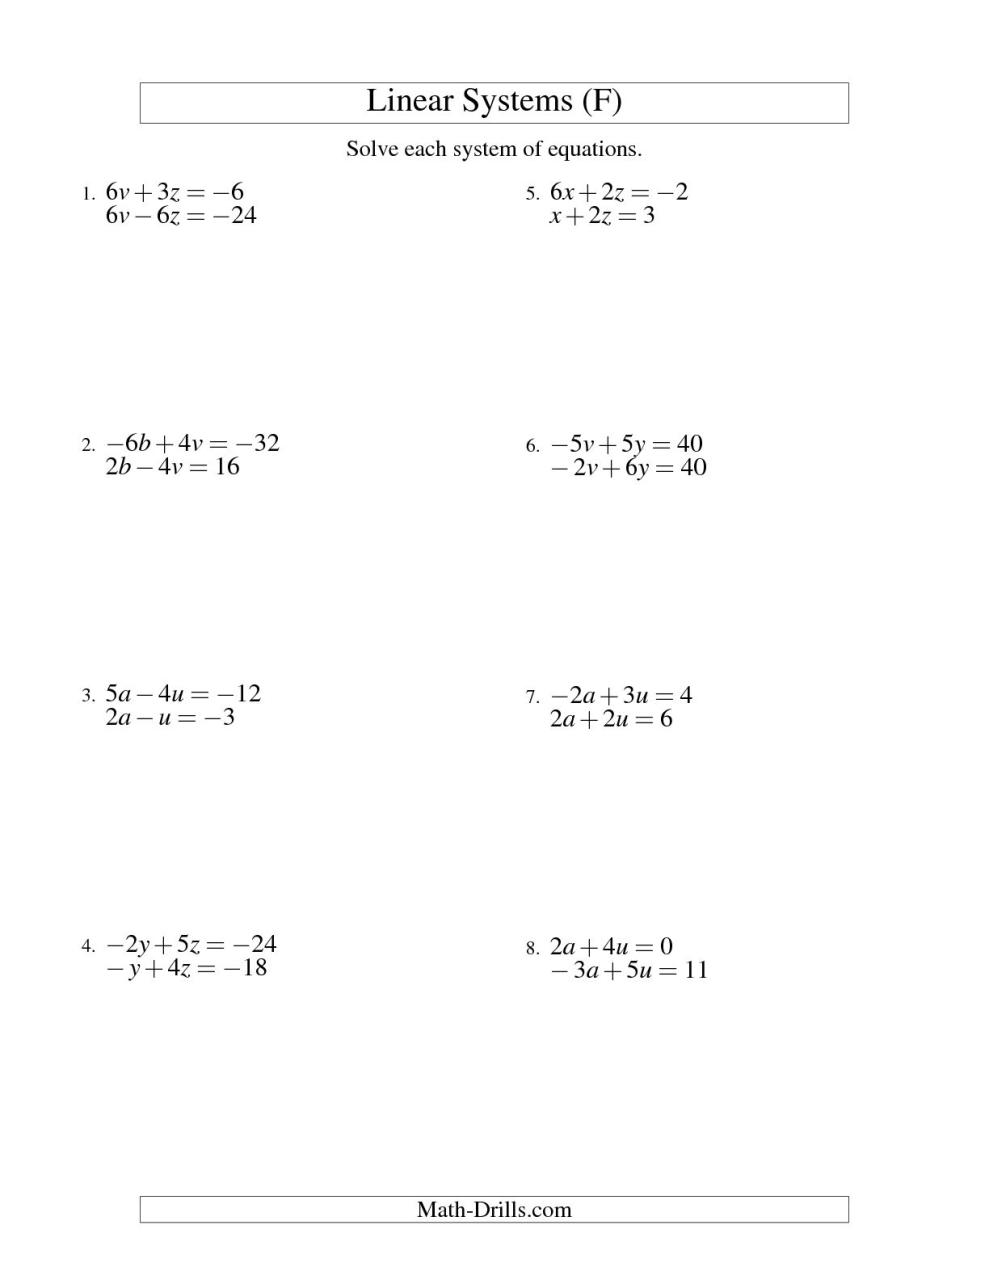 9 Best Images of Solving Equations With Substitution Worksheet